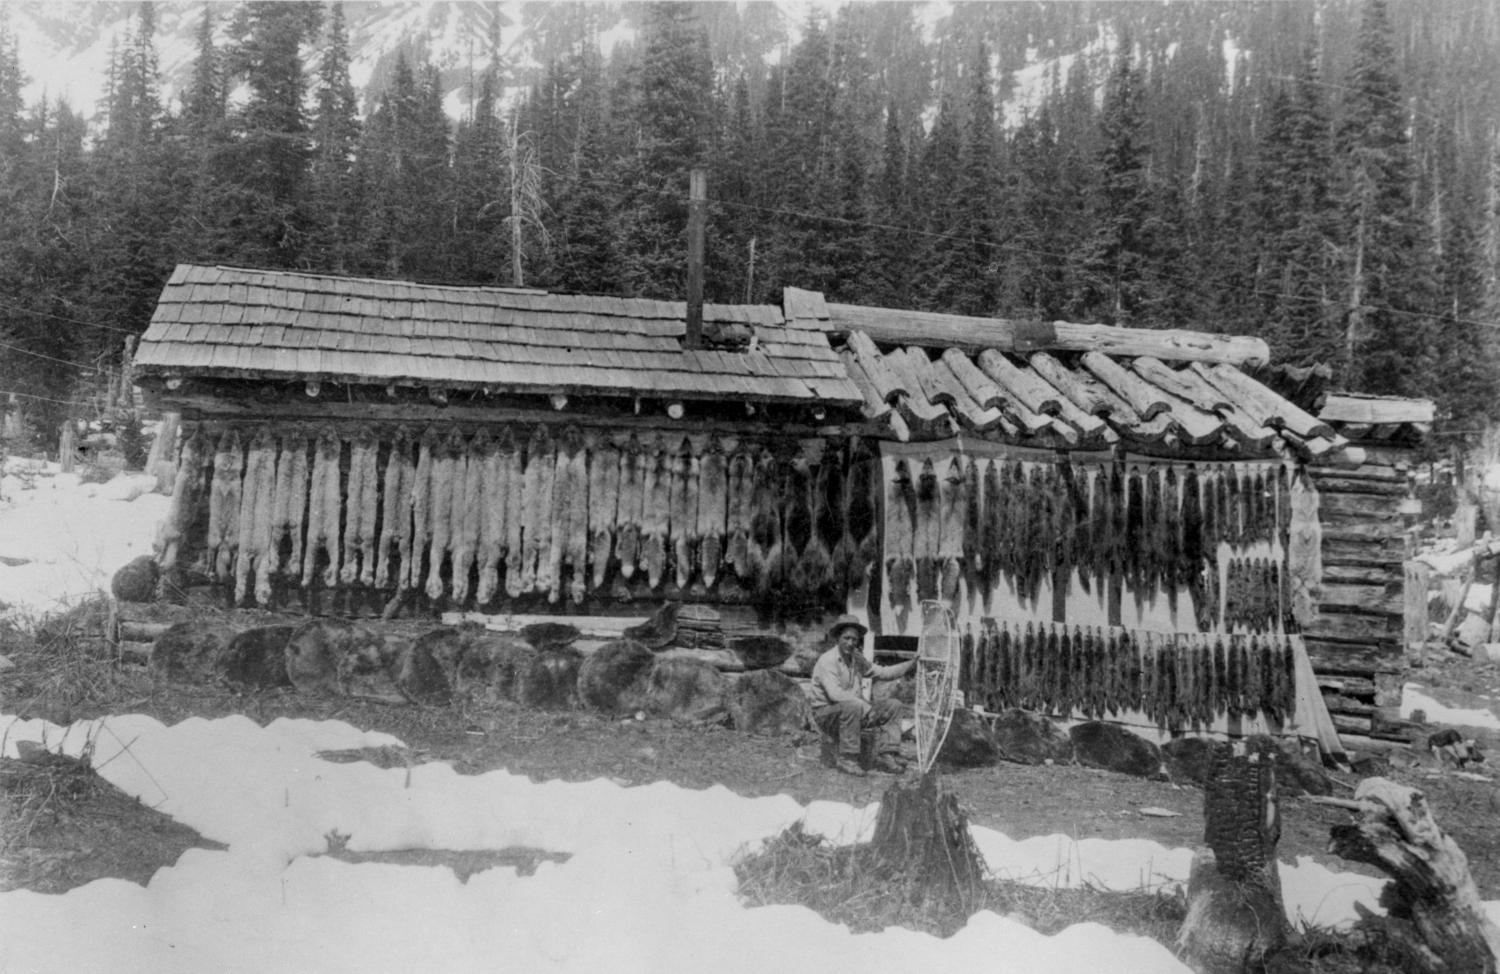 Dozens of pelts hang on the side of a wooden building.